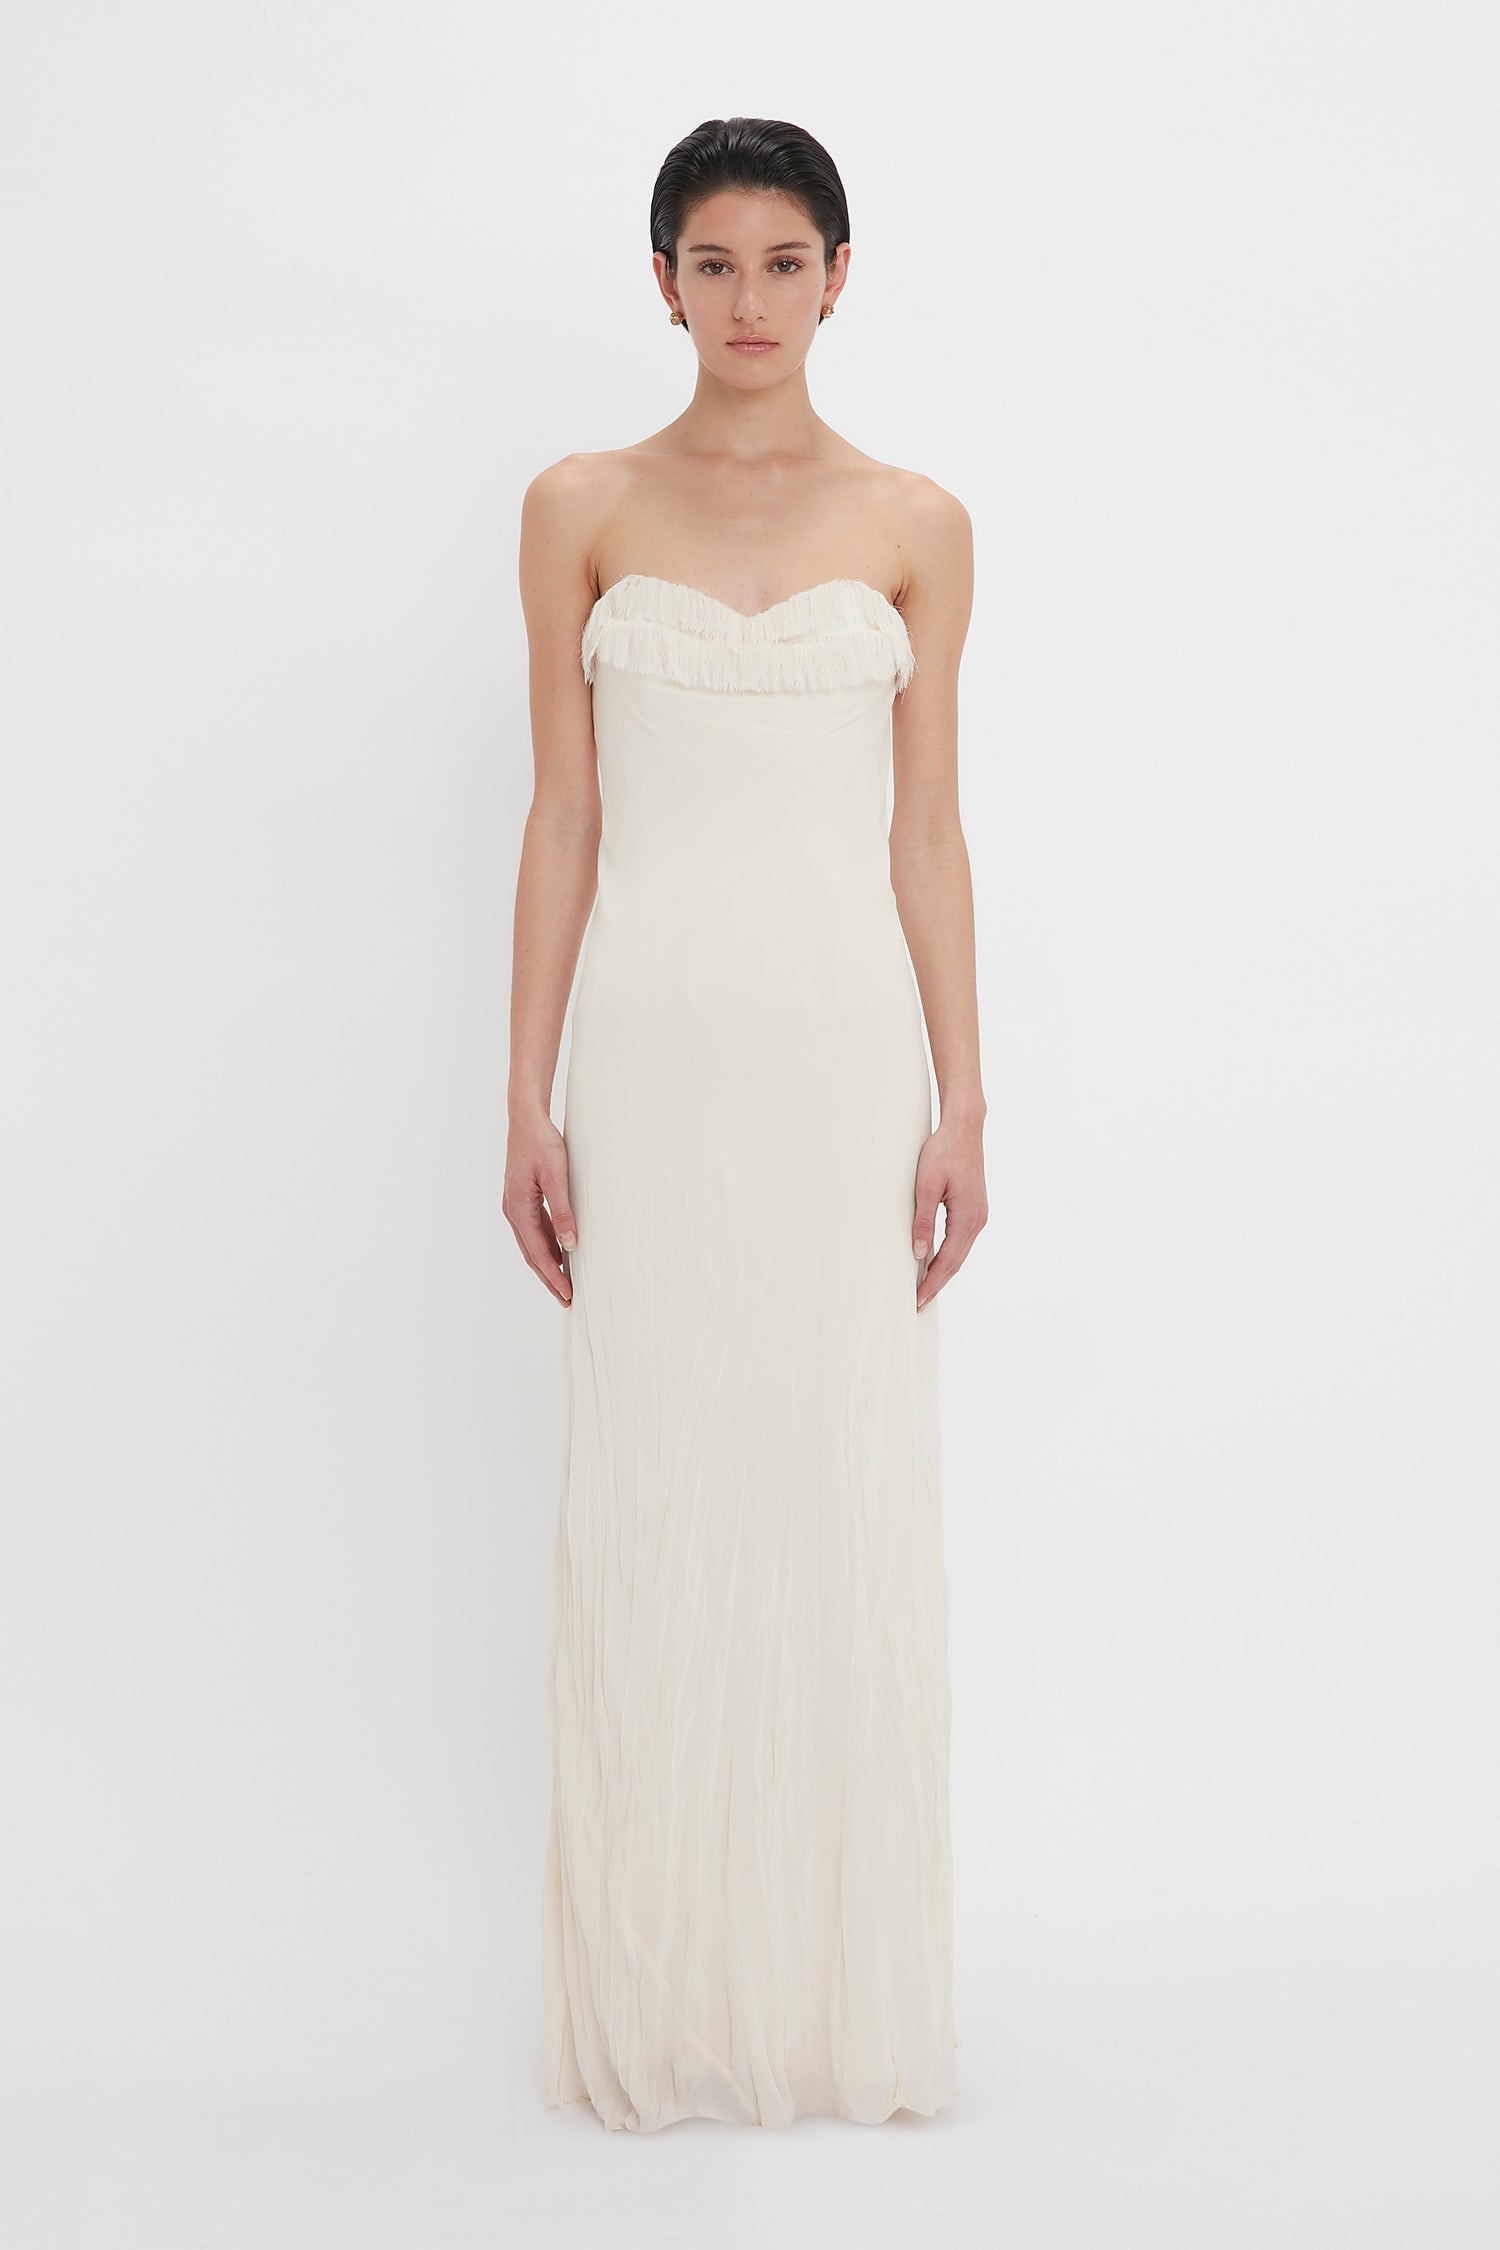 A woman in a Victoria Beckham Exclusive Floor-Length Corset Detail Gown In Ivory stands against a plain white background, looking directly at the camera.